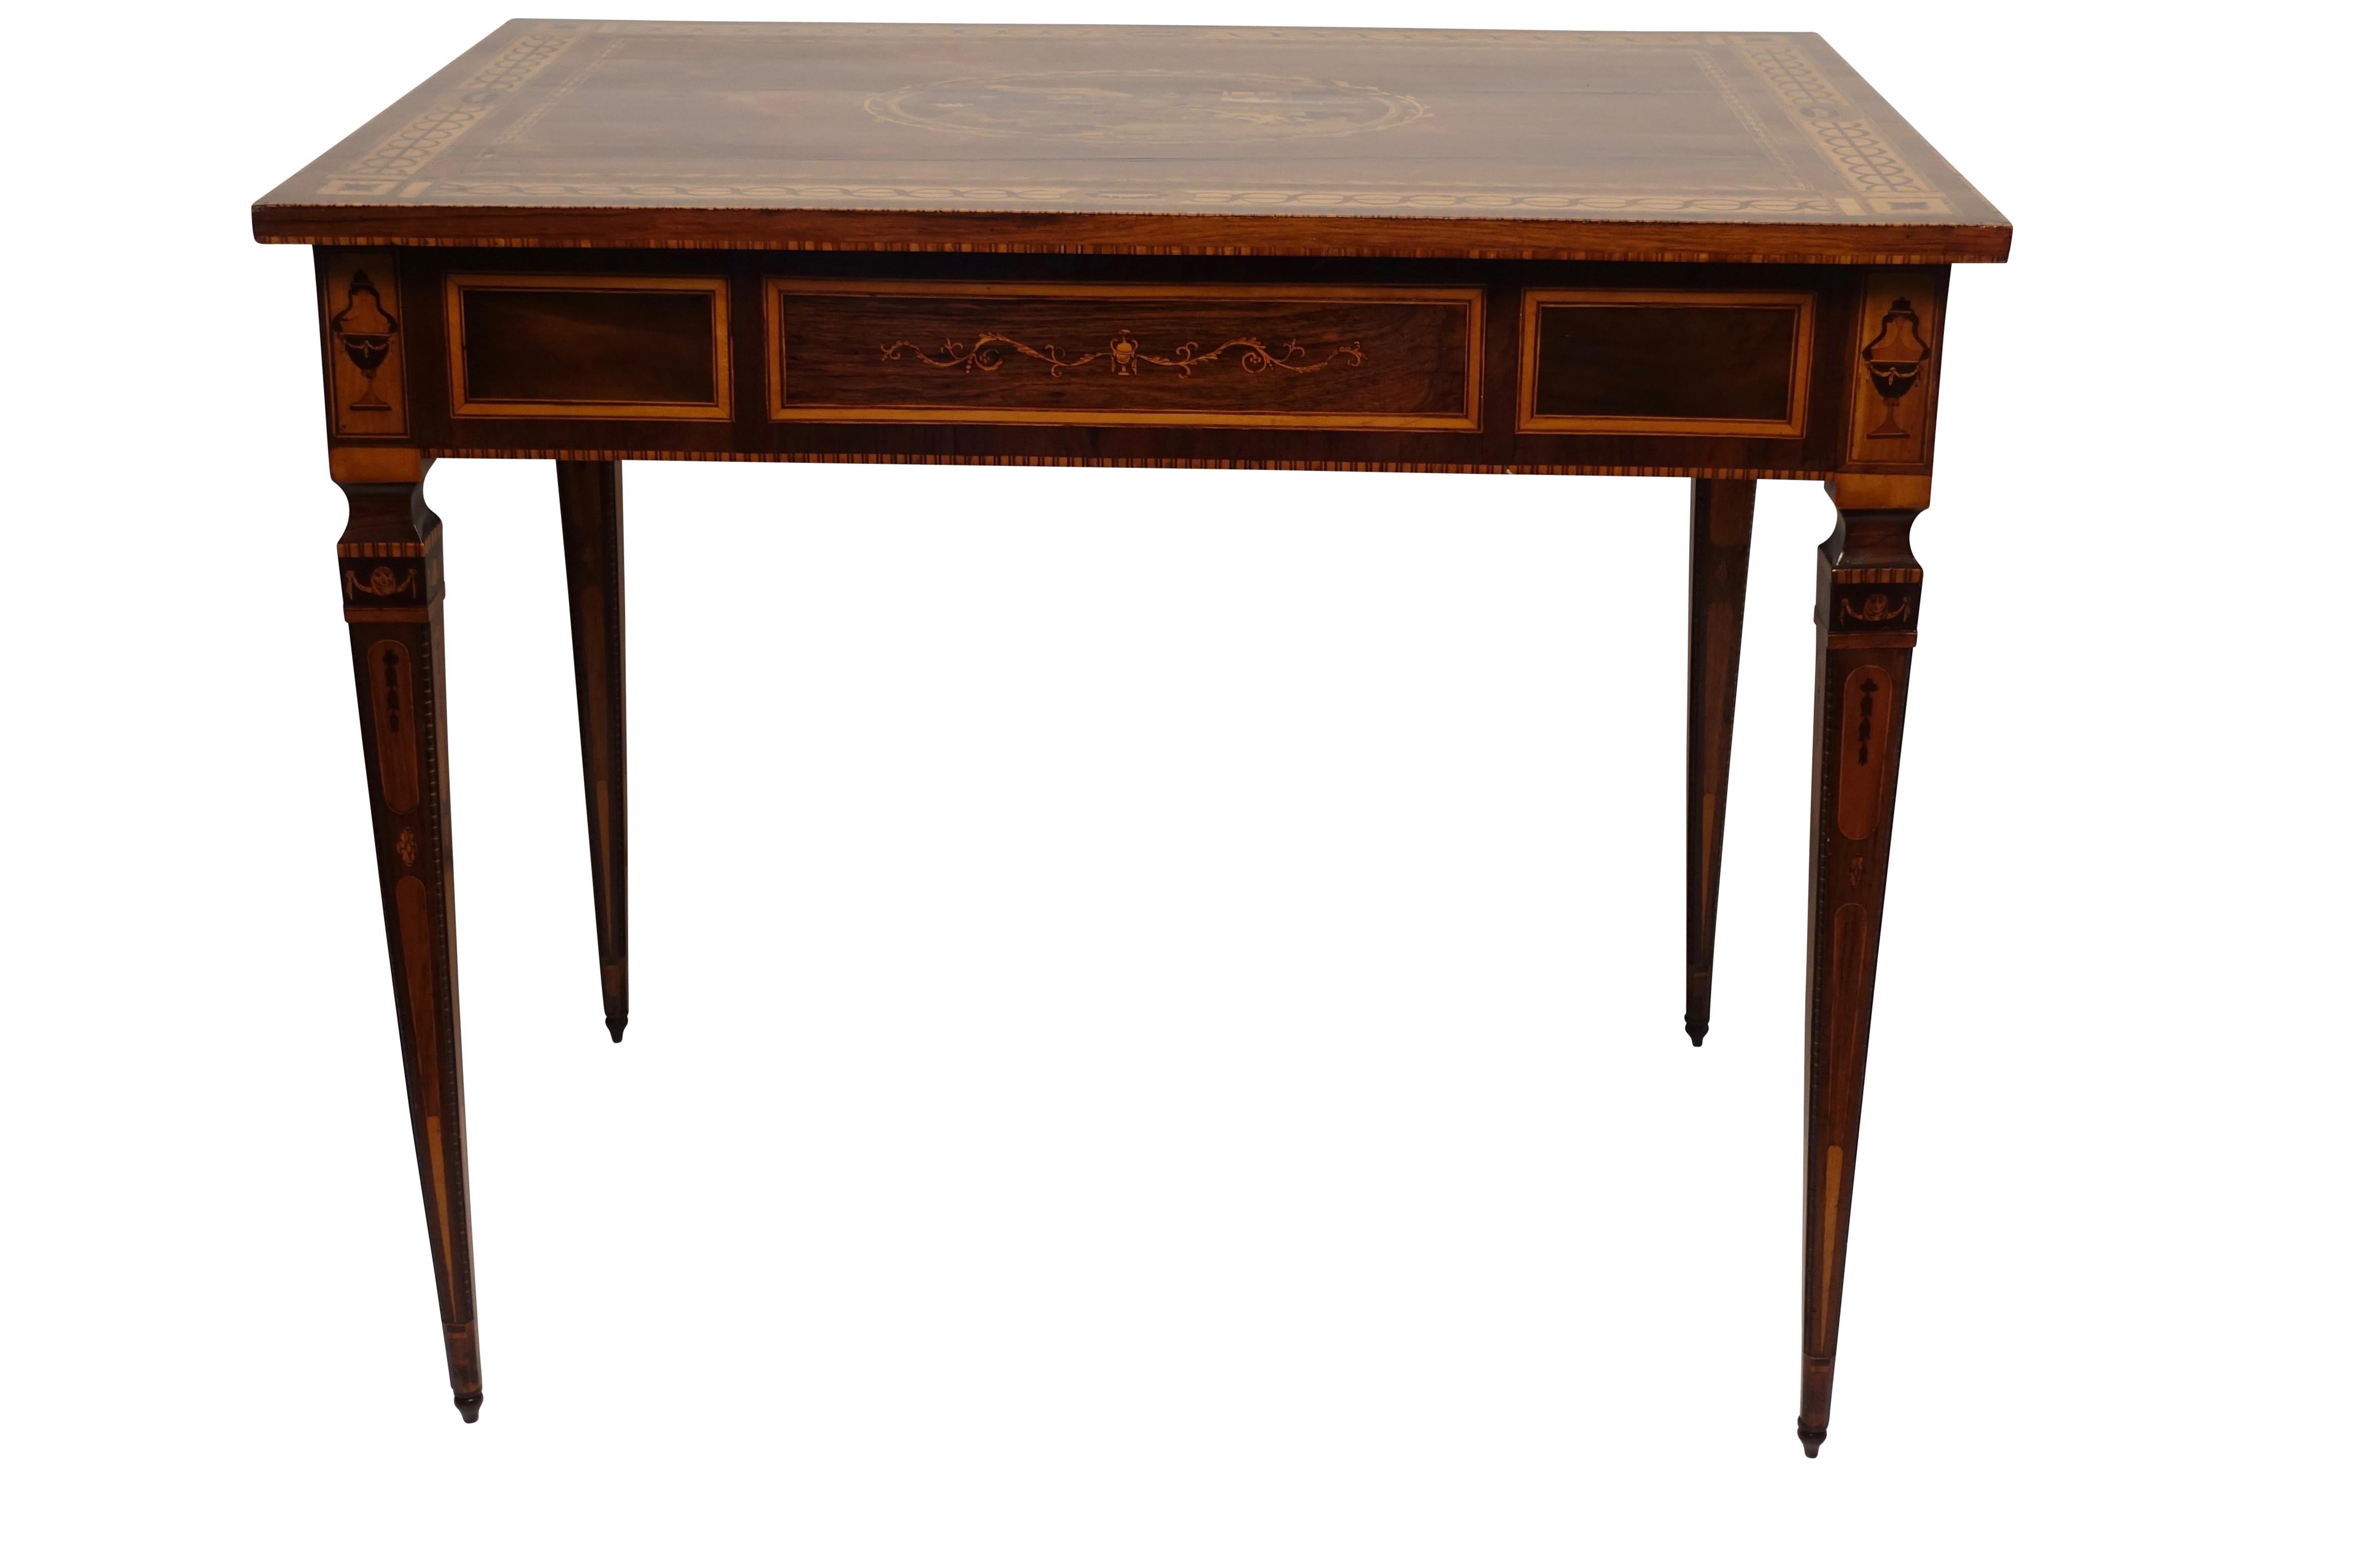 Mixed Woods Marquetry Inlaid Writing Table, Northern Italian, Late 18th Century For Sale 5